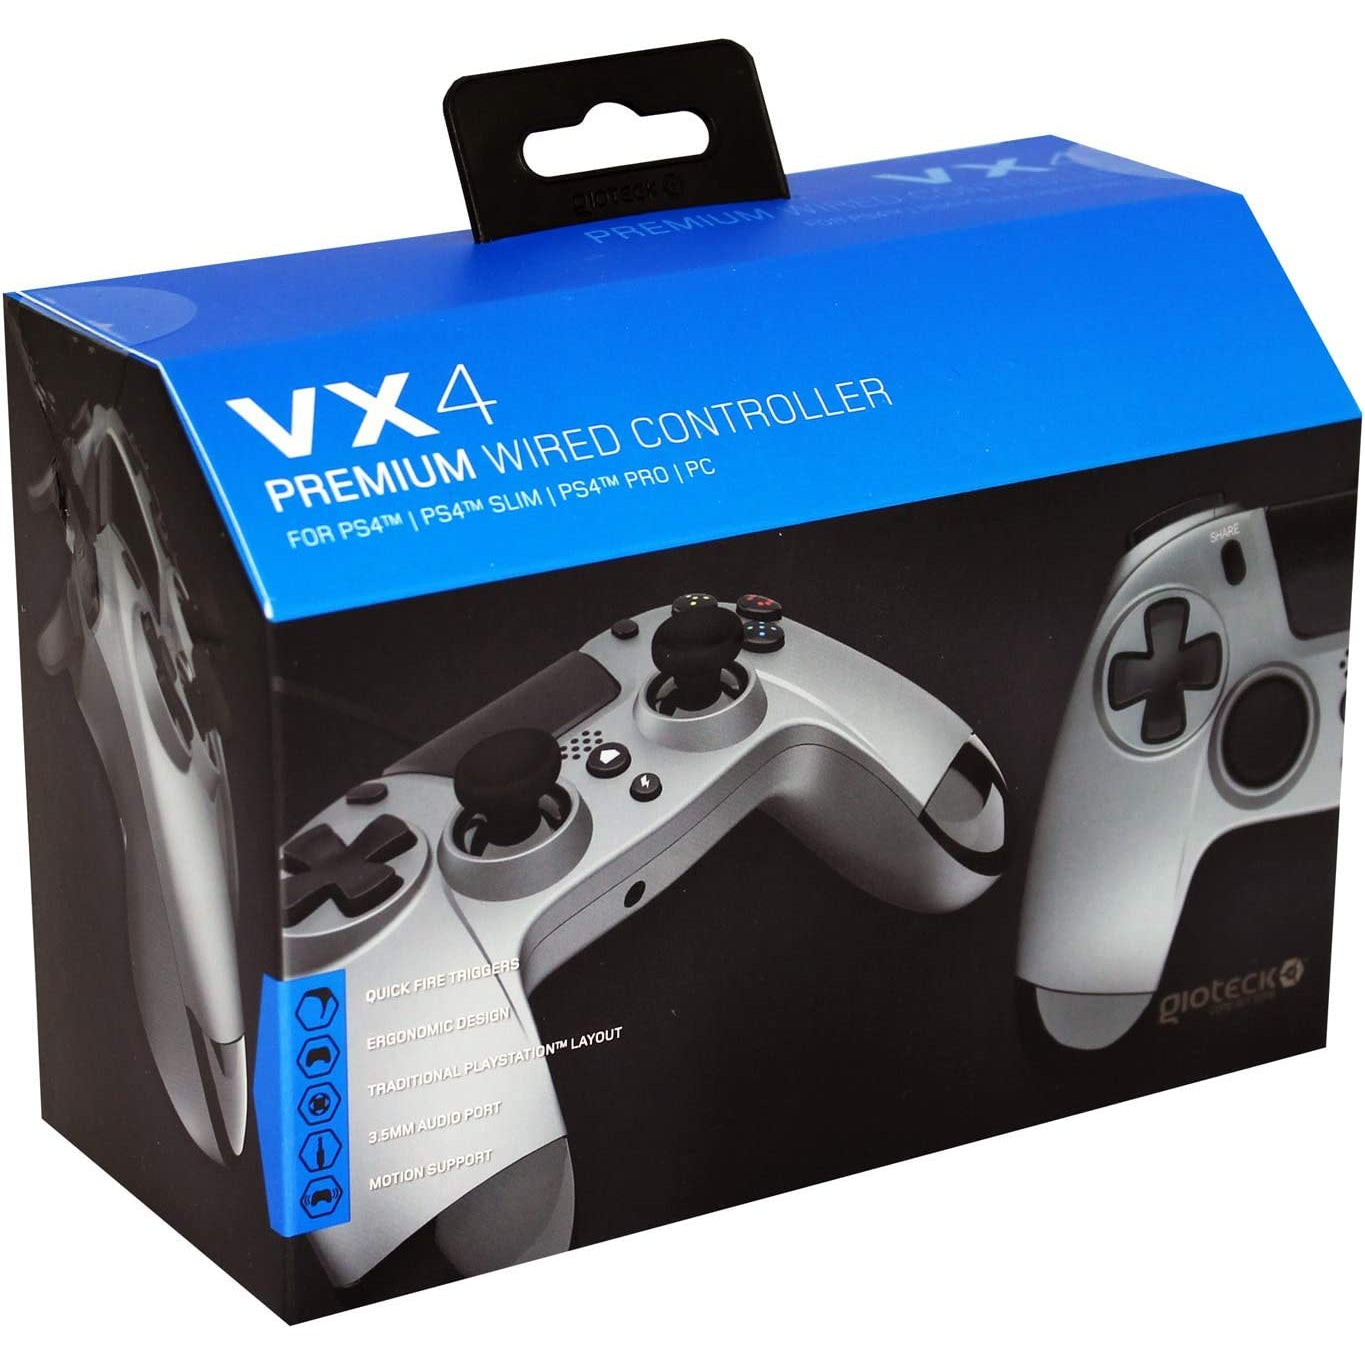 Gioteck VX-4 Wired Controller for PlayStation 4, Silver